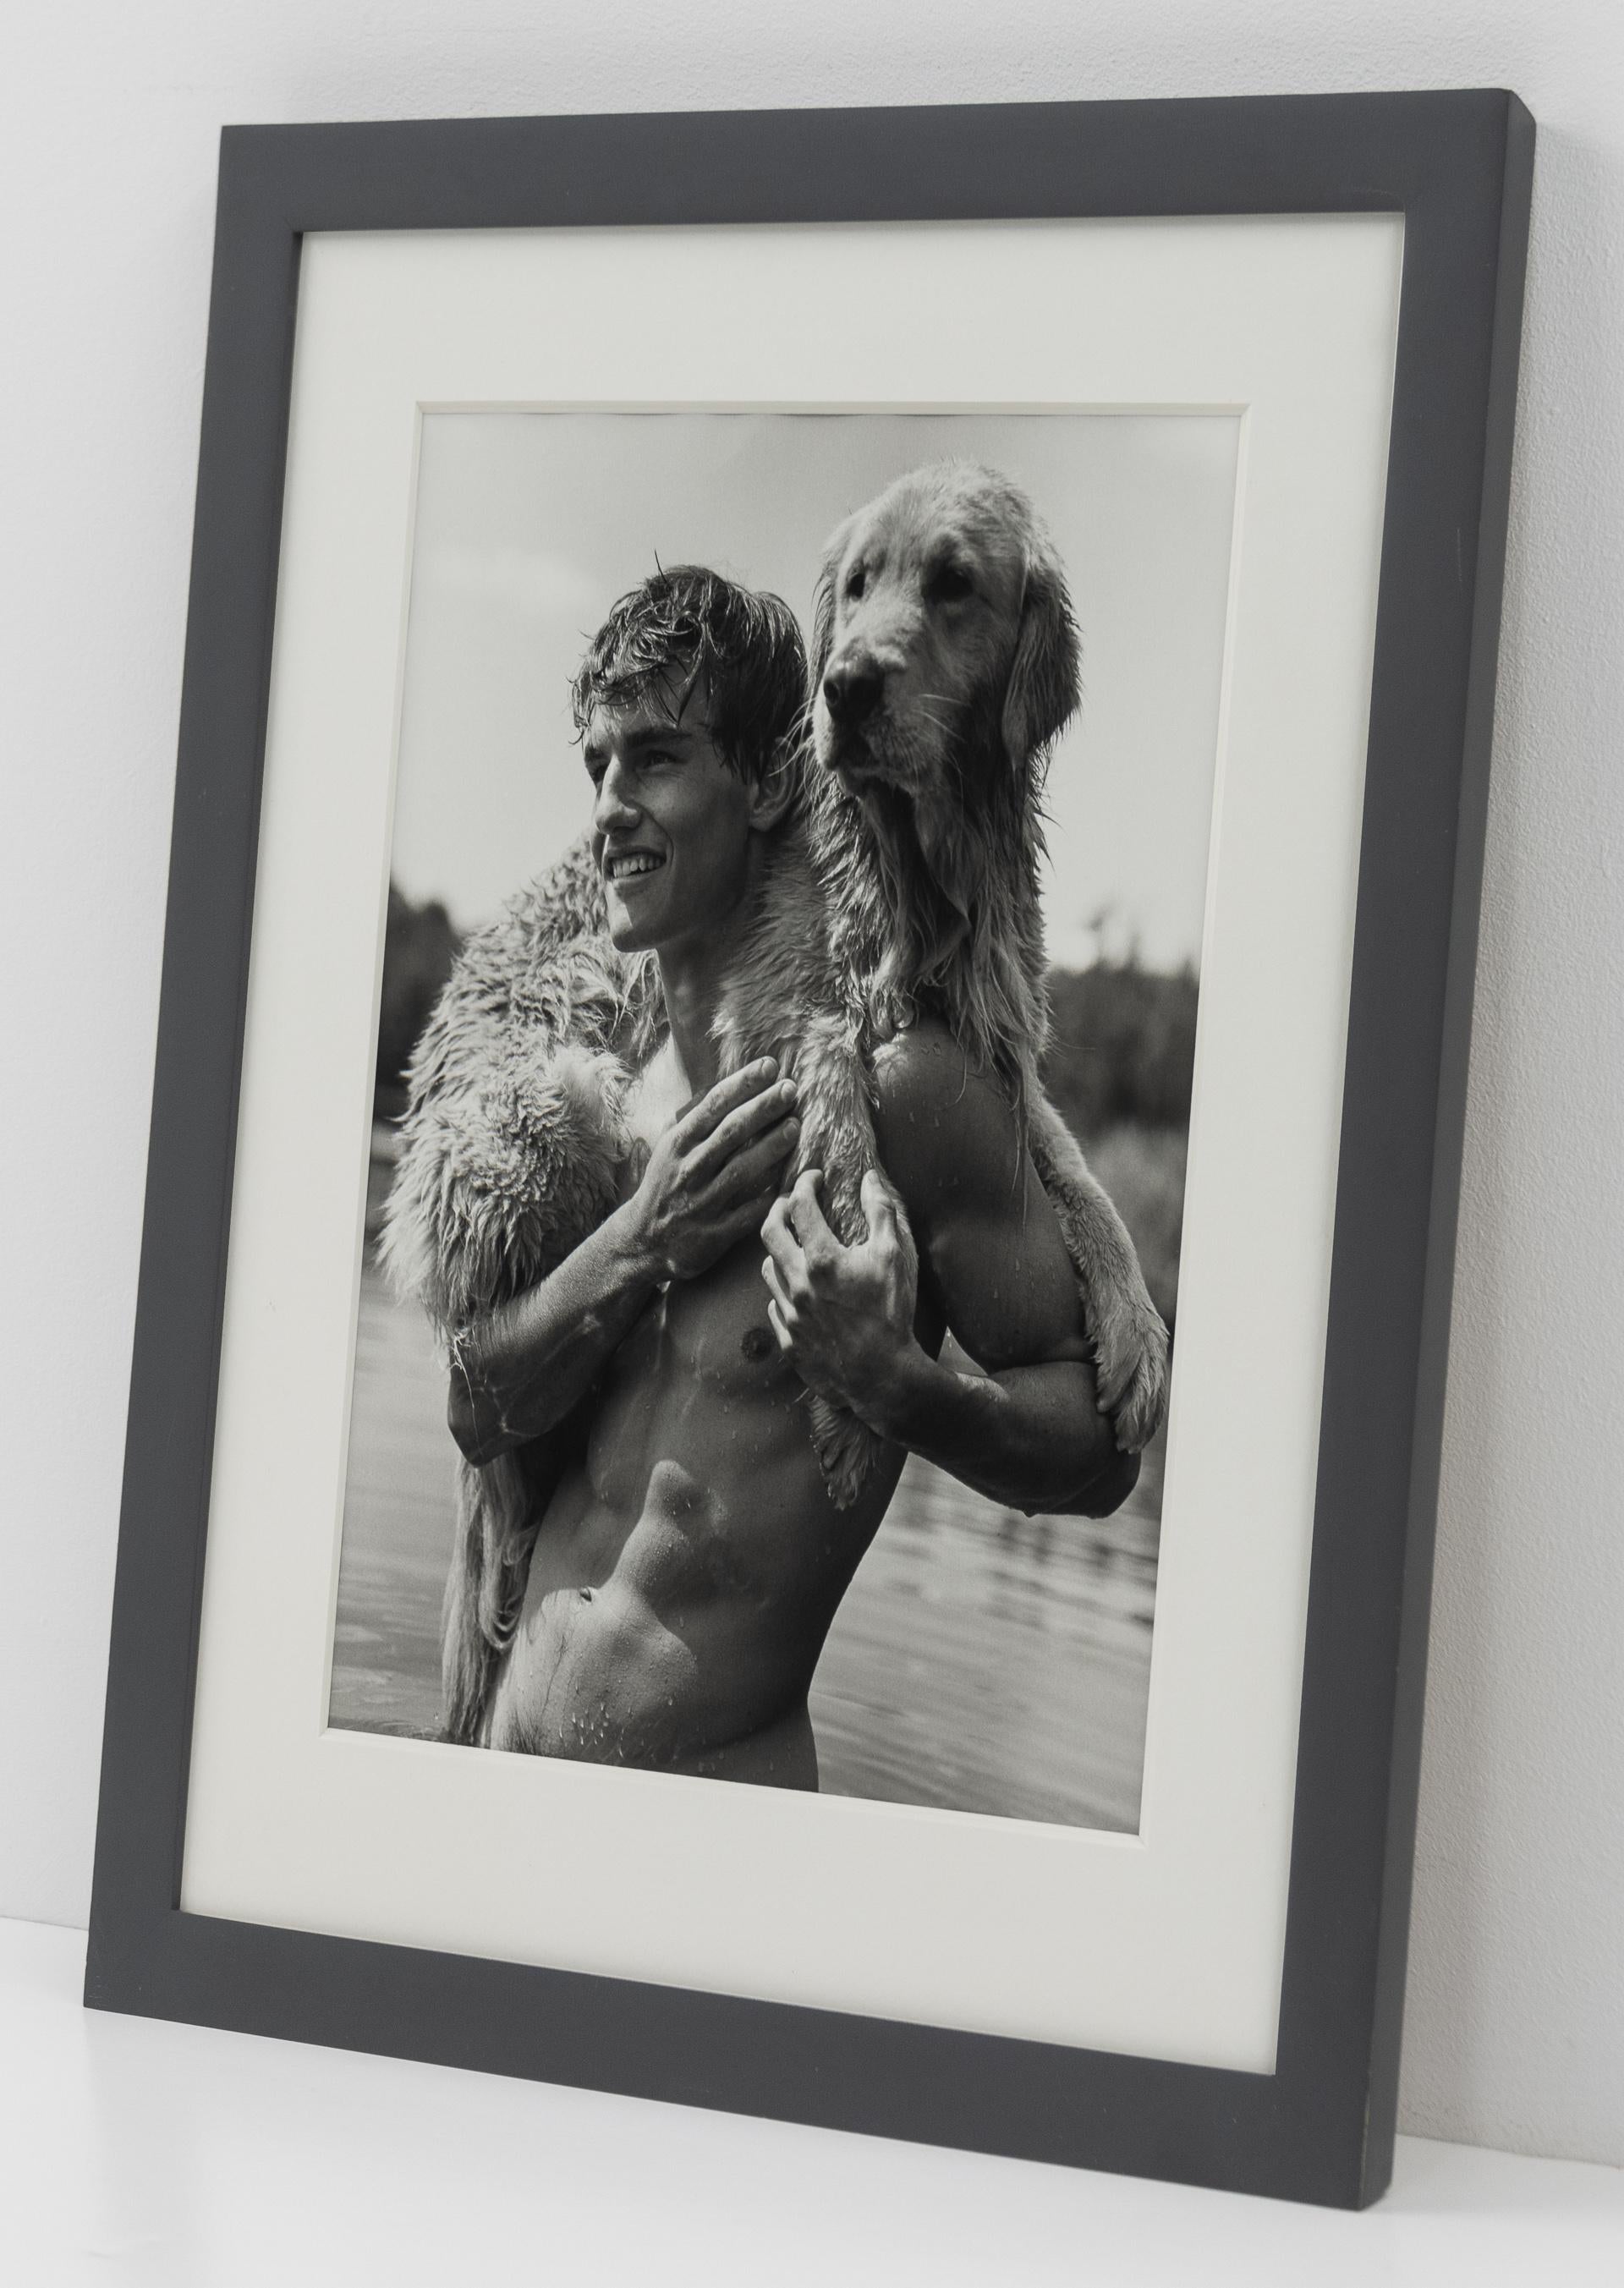 This is a Bruce Weber photograph of a smiling shirtless man and a golden retriever offered by CLAMP in New York City.